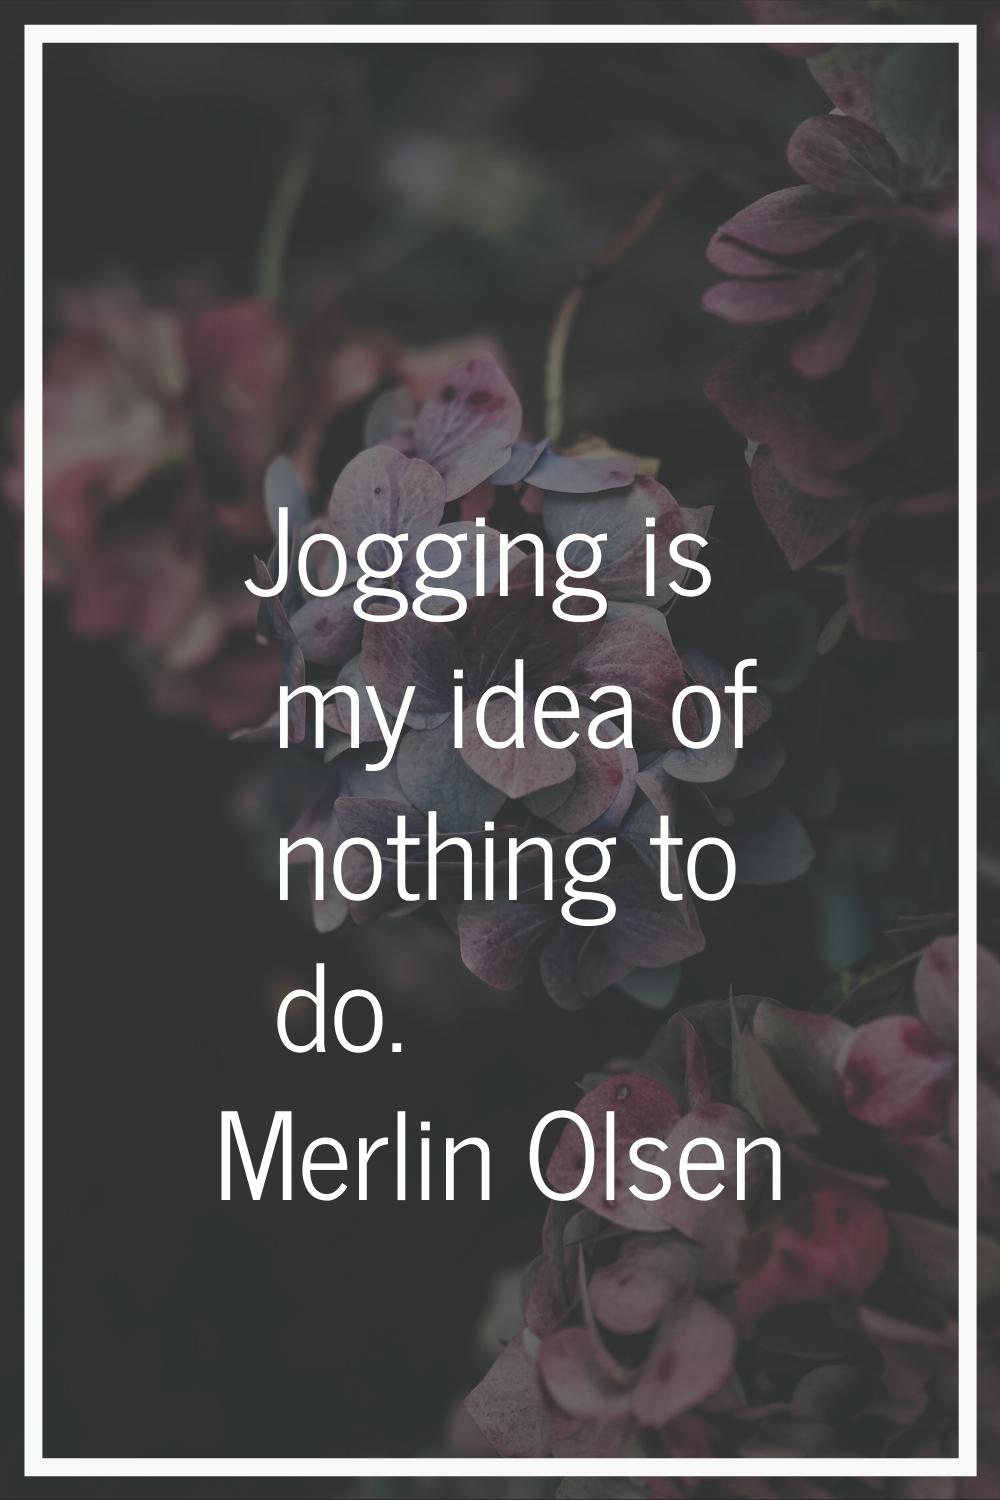 Jogging is my idea of nothing to do.